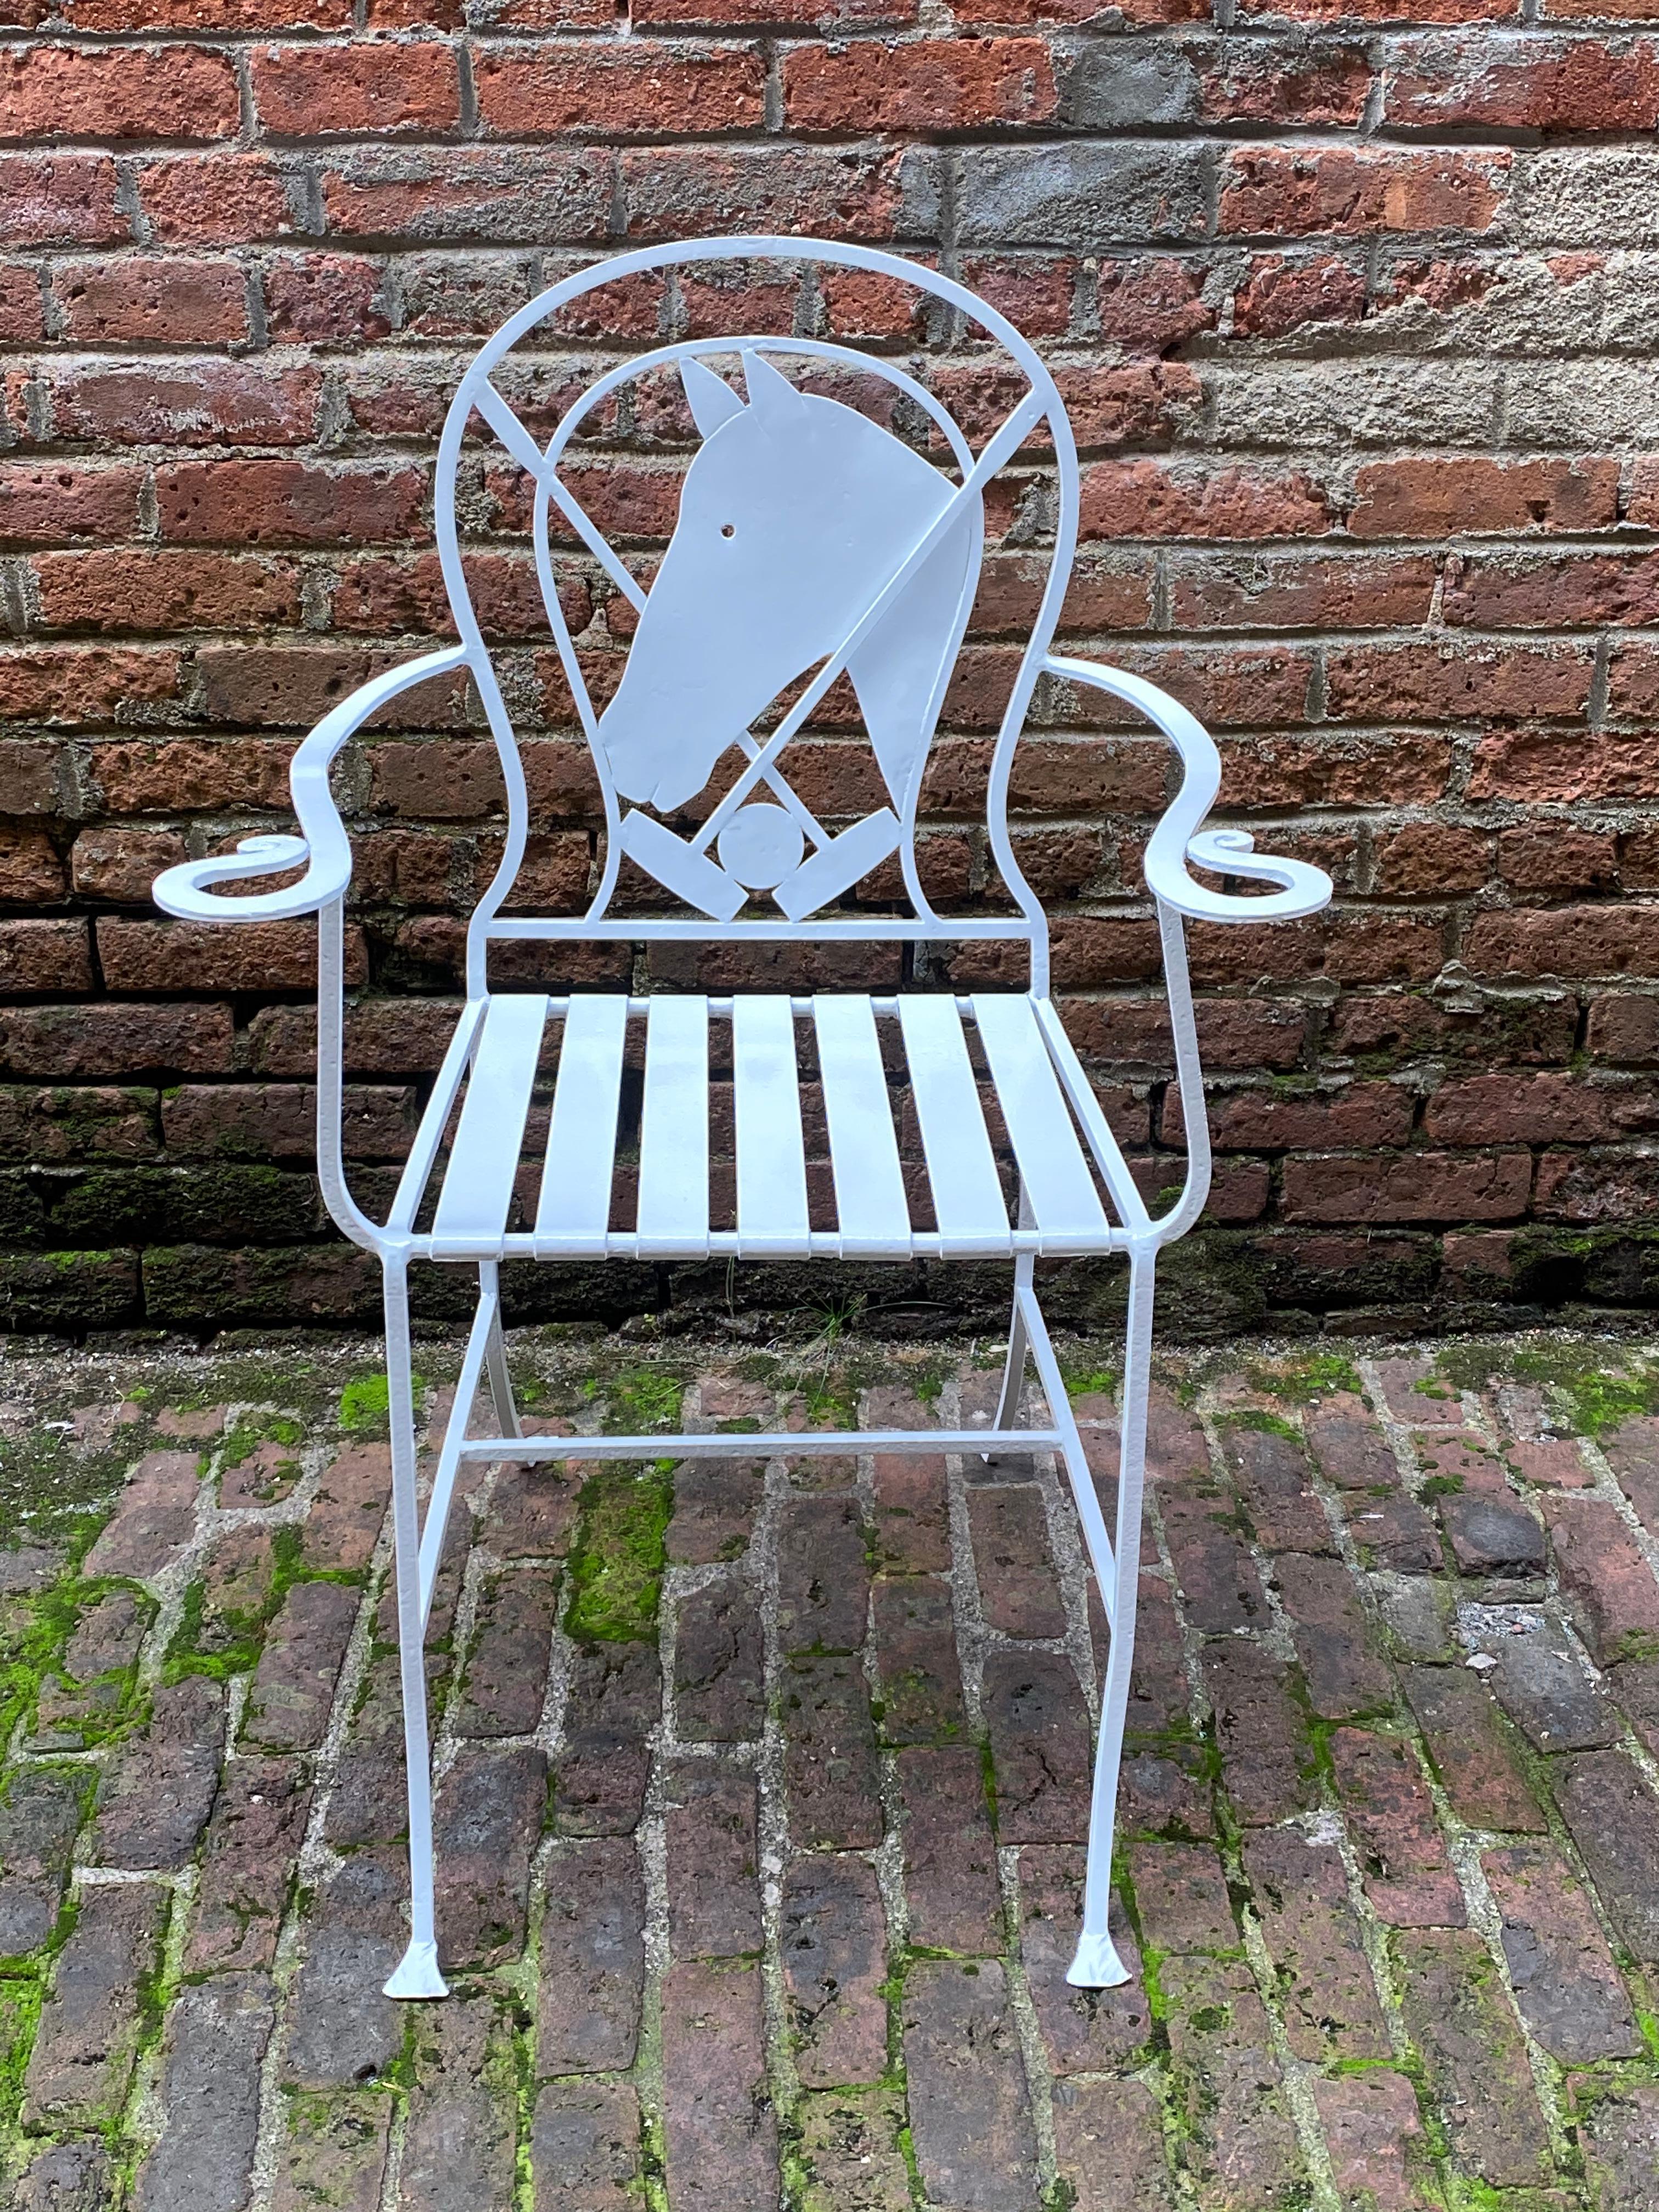 Wrought iron polo pony chair, circa 1940-1950. Sandblasted and powder-coated glossy white. Featuring a large profile horse head with crossed polo mallets, arms ending in a stylized horse shoe curve, strap seat, spade type foot, and 'H' stretcher